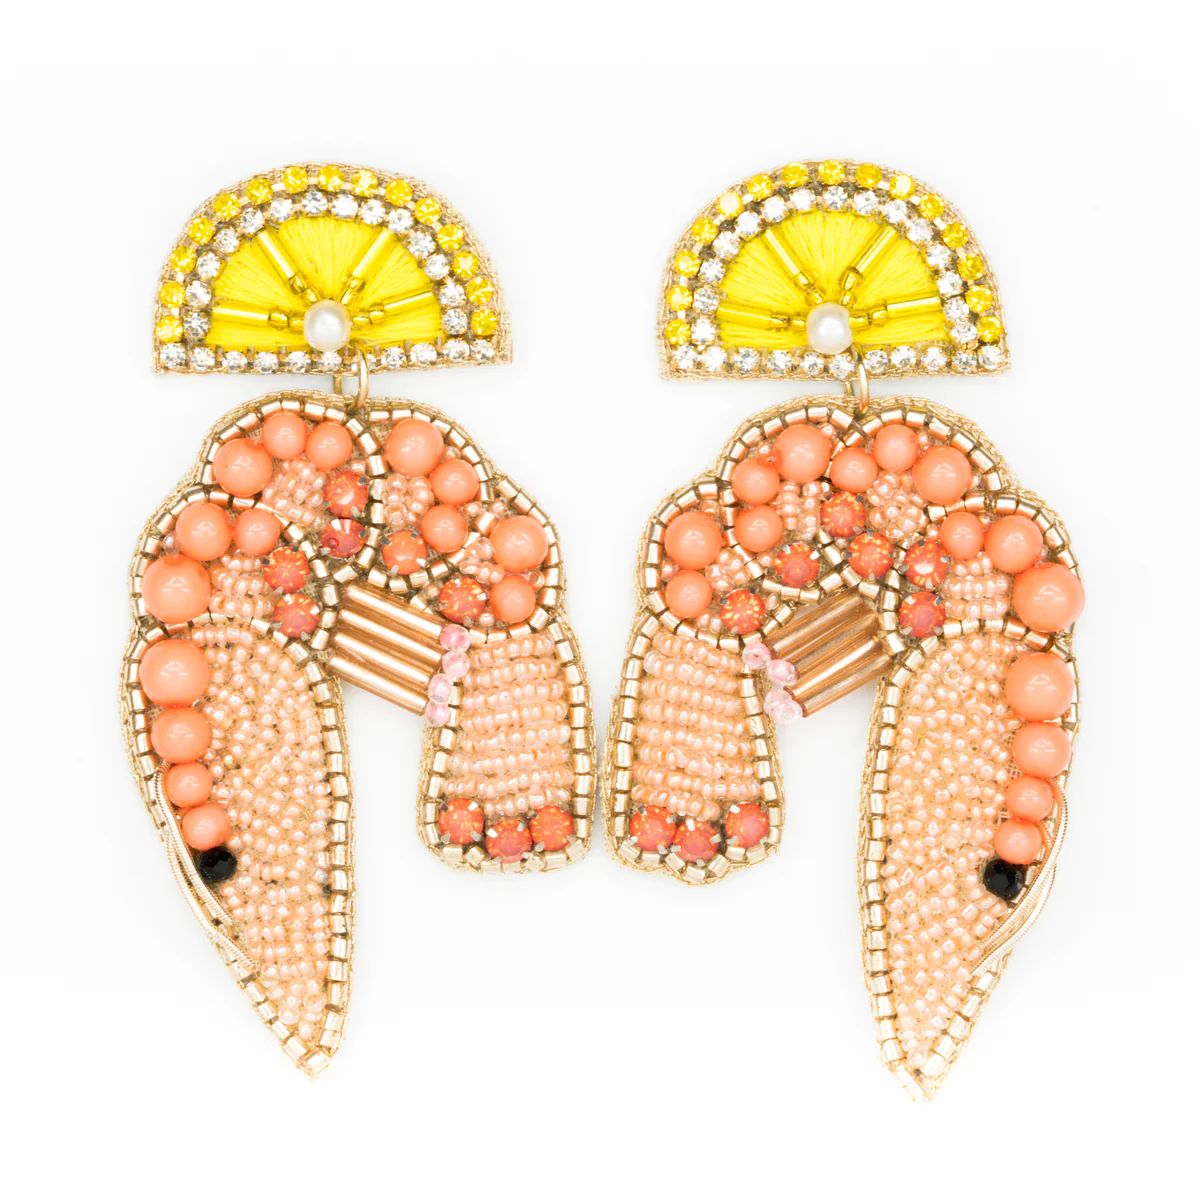 Shrimp Cocktail Earrings | Beth Ladd Collections